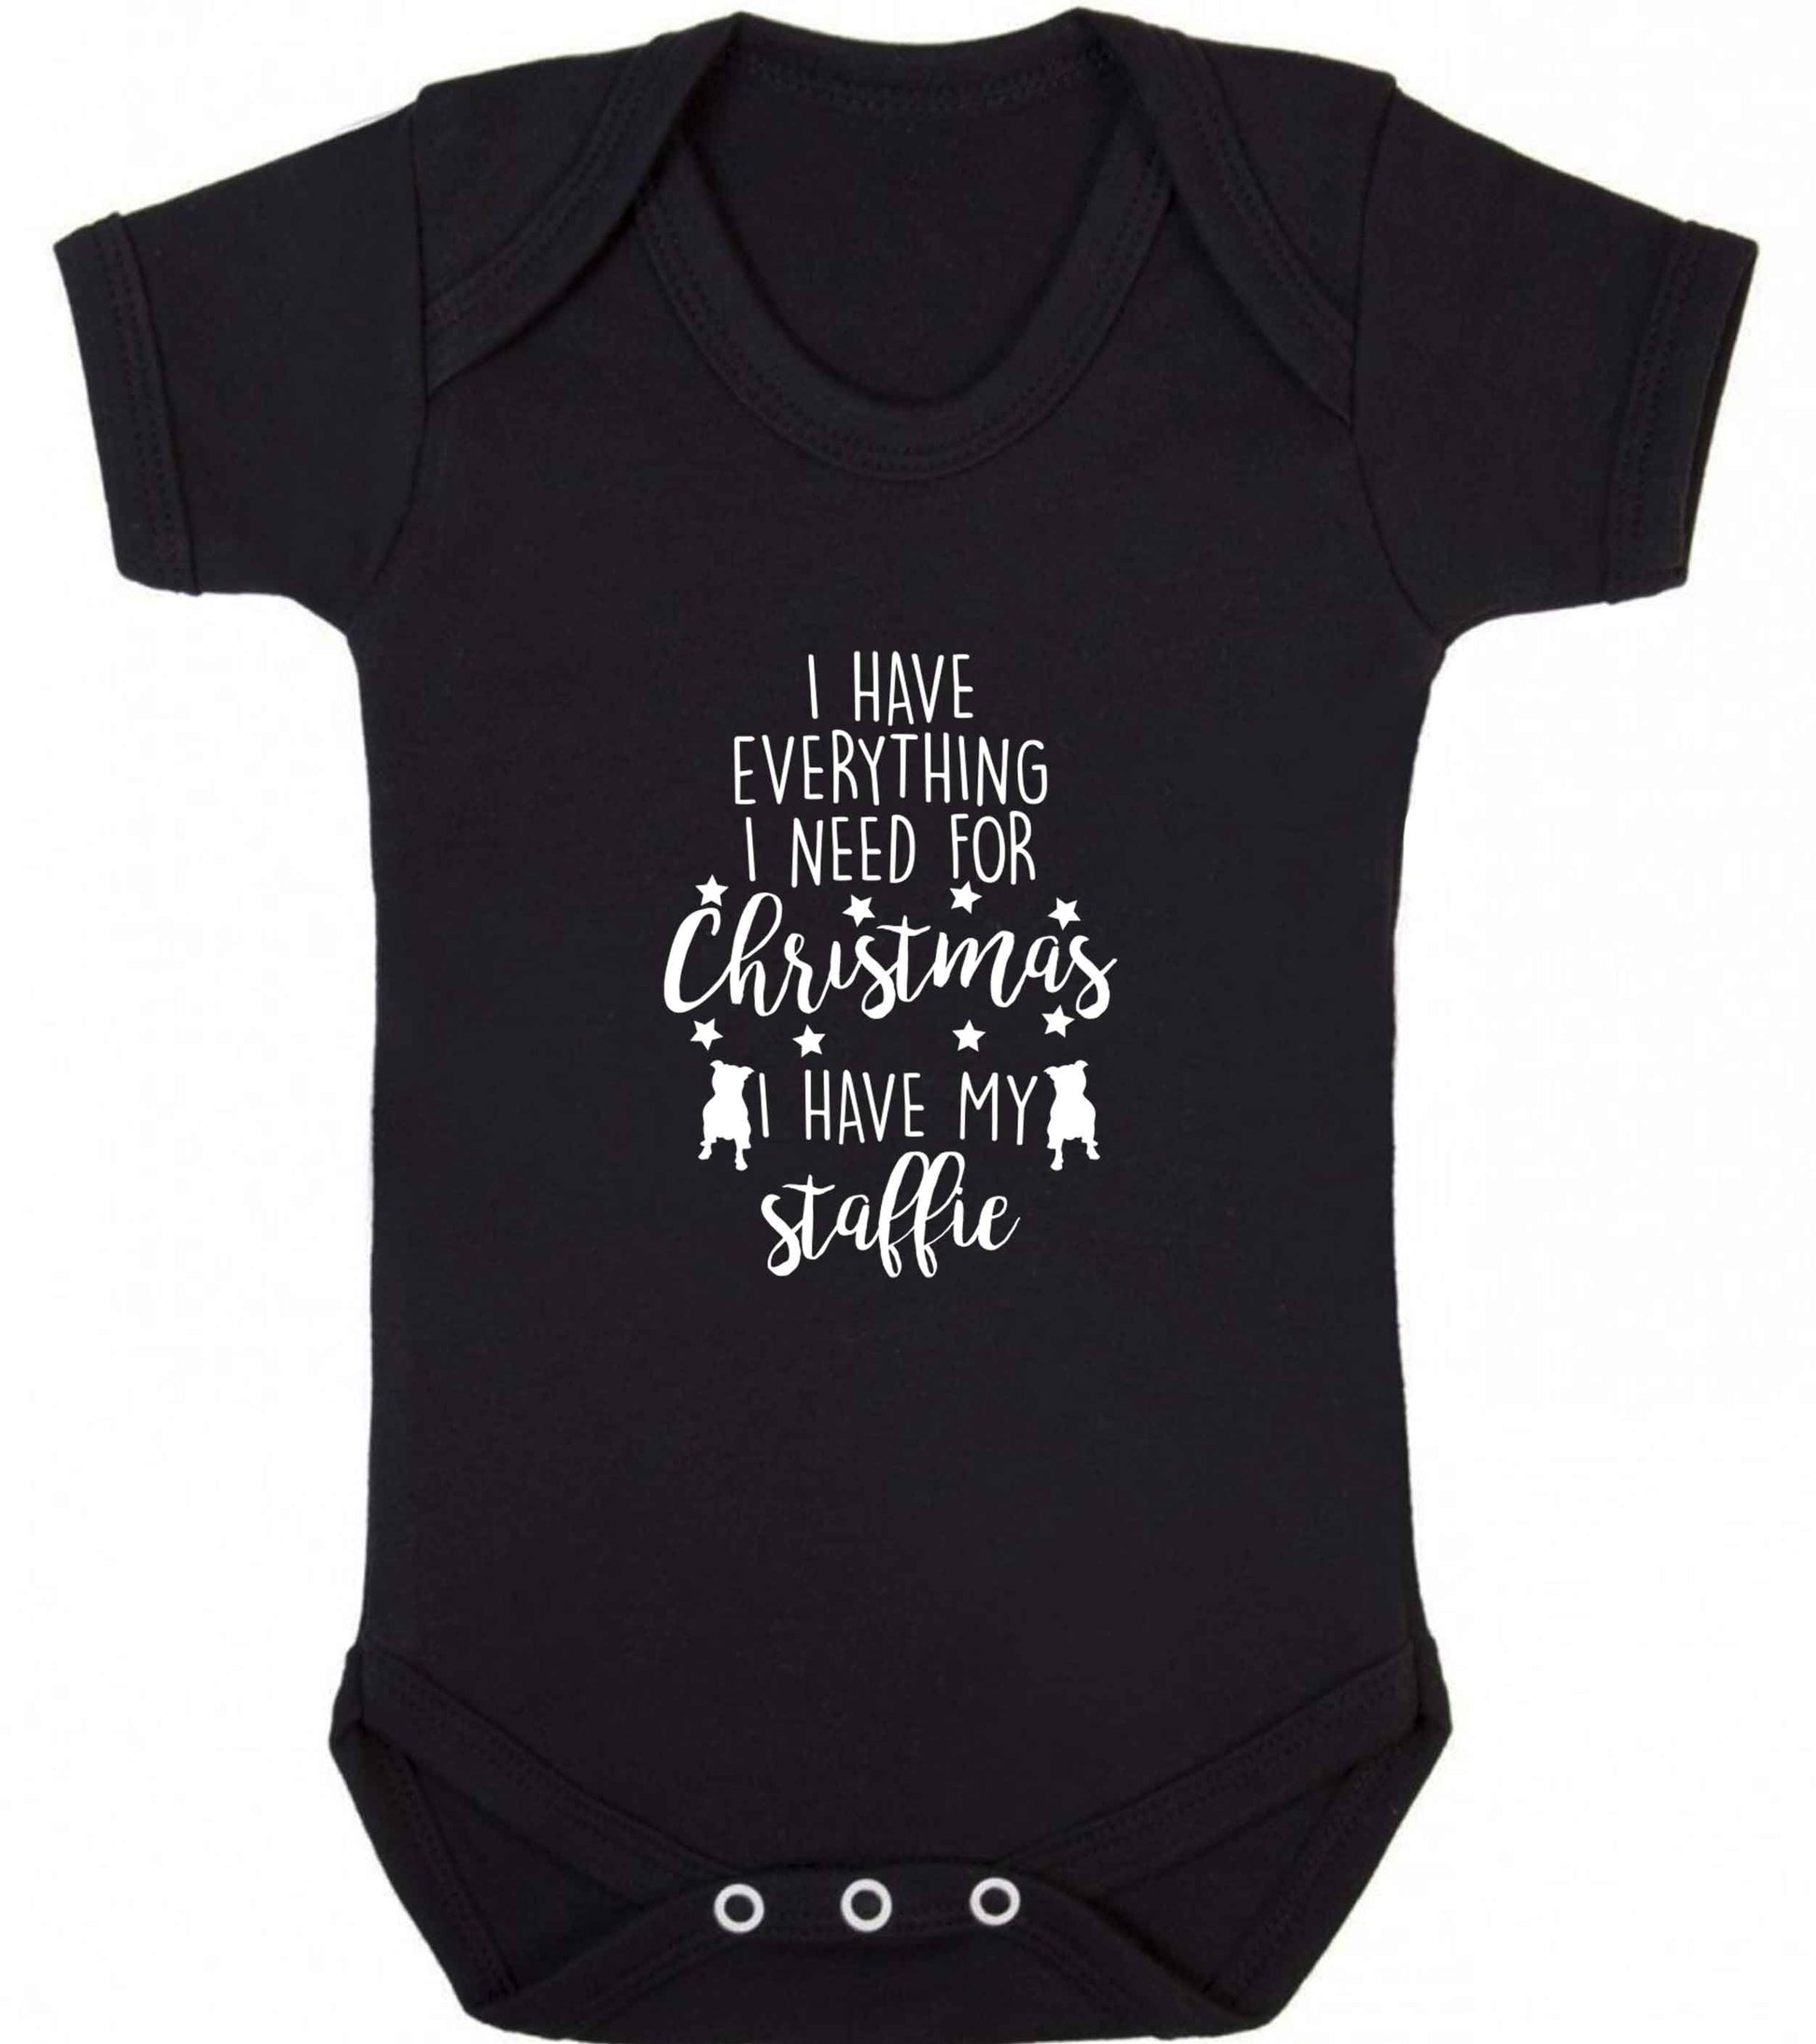 I have everything I need for Christmas I have my staffie baby vest black 18-24 months